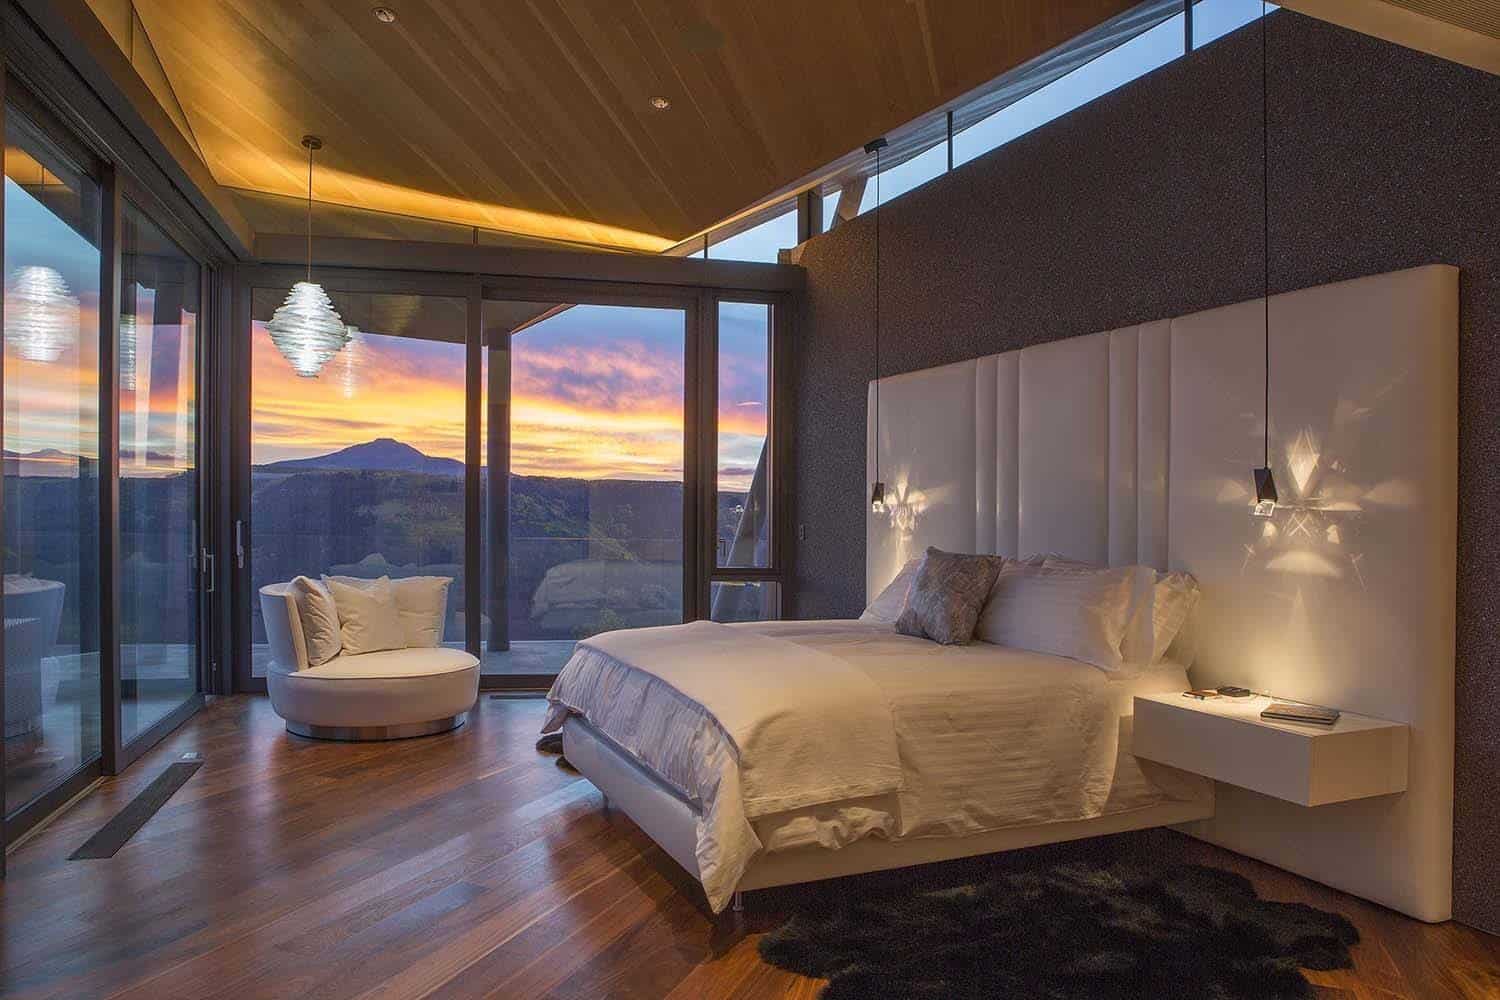 Modern-Residence-Colorado-Poss Architecture-29-1 Kindesign